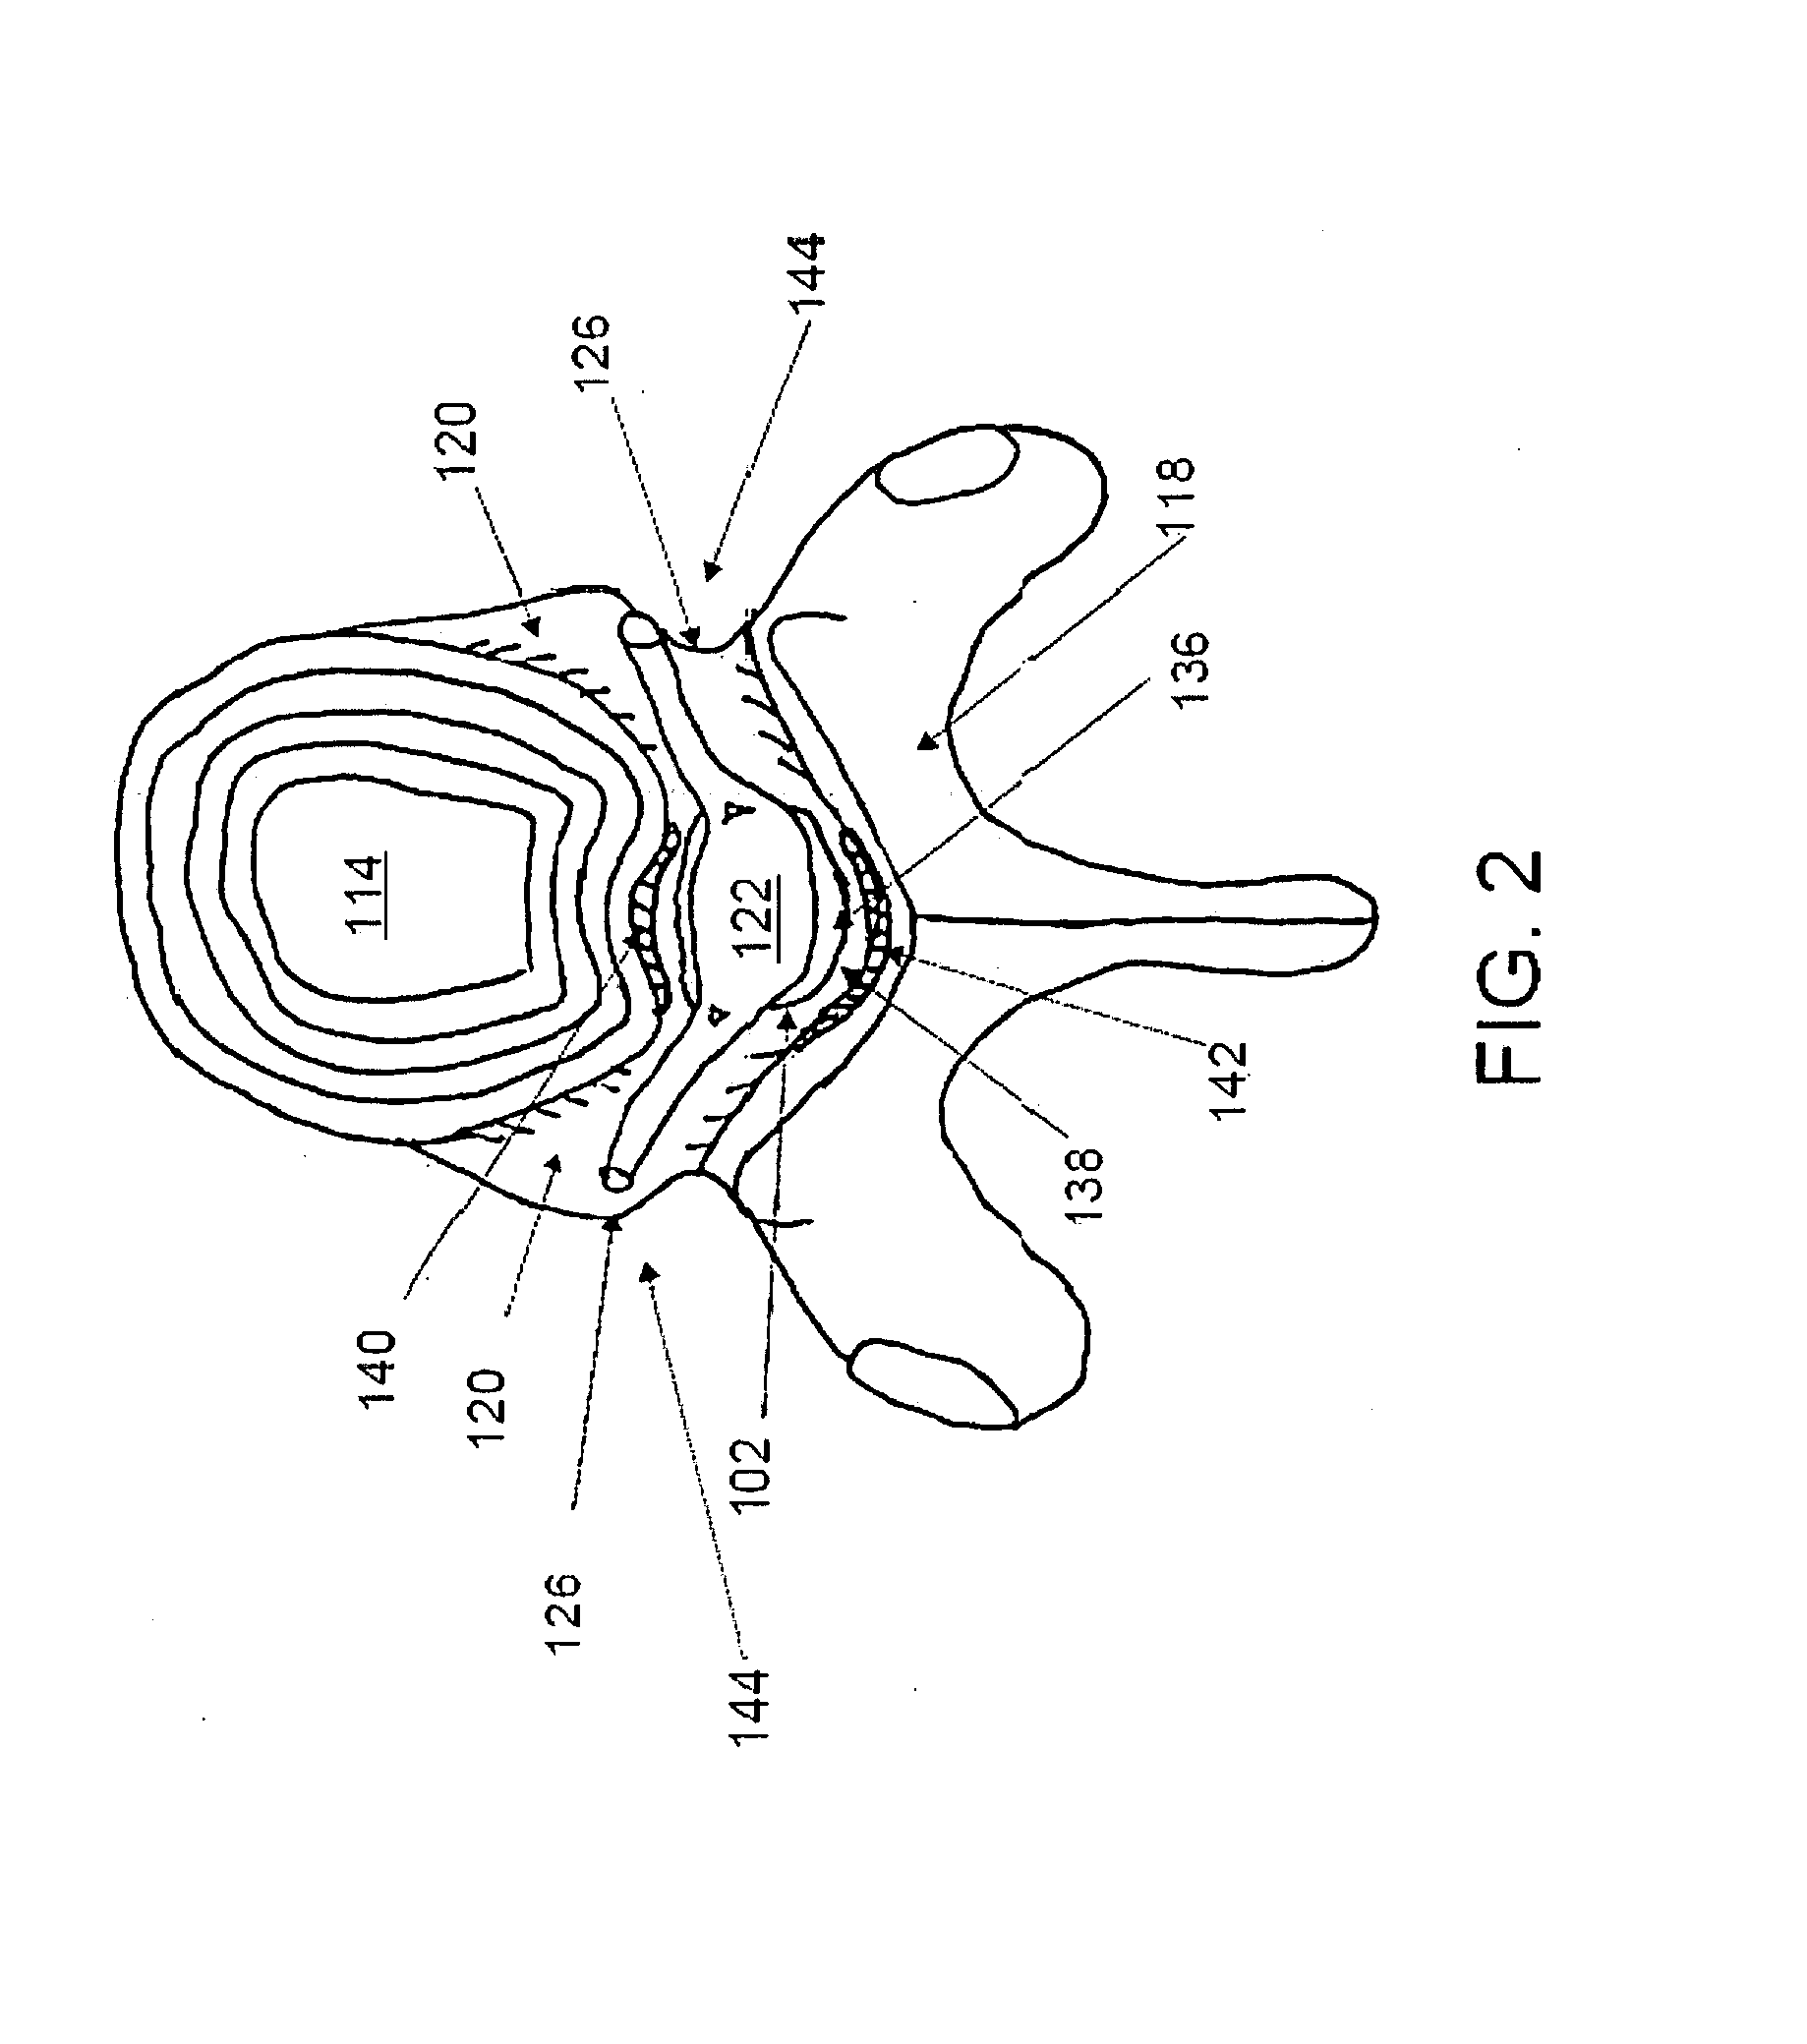 Discectomy devices and methods